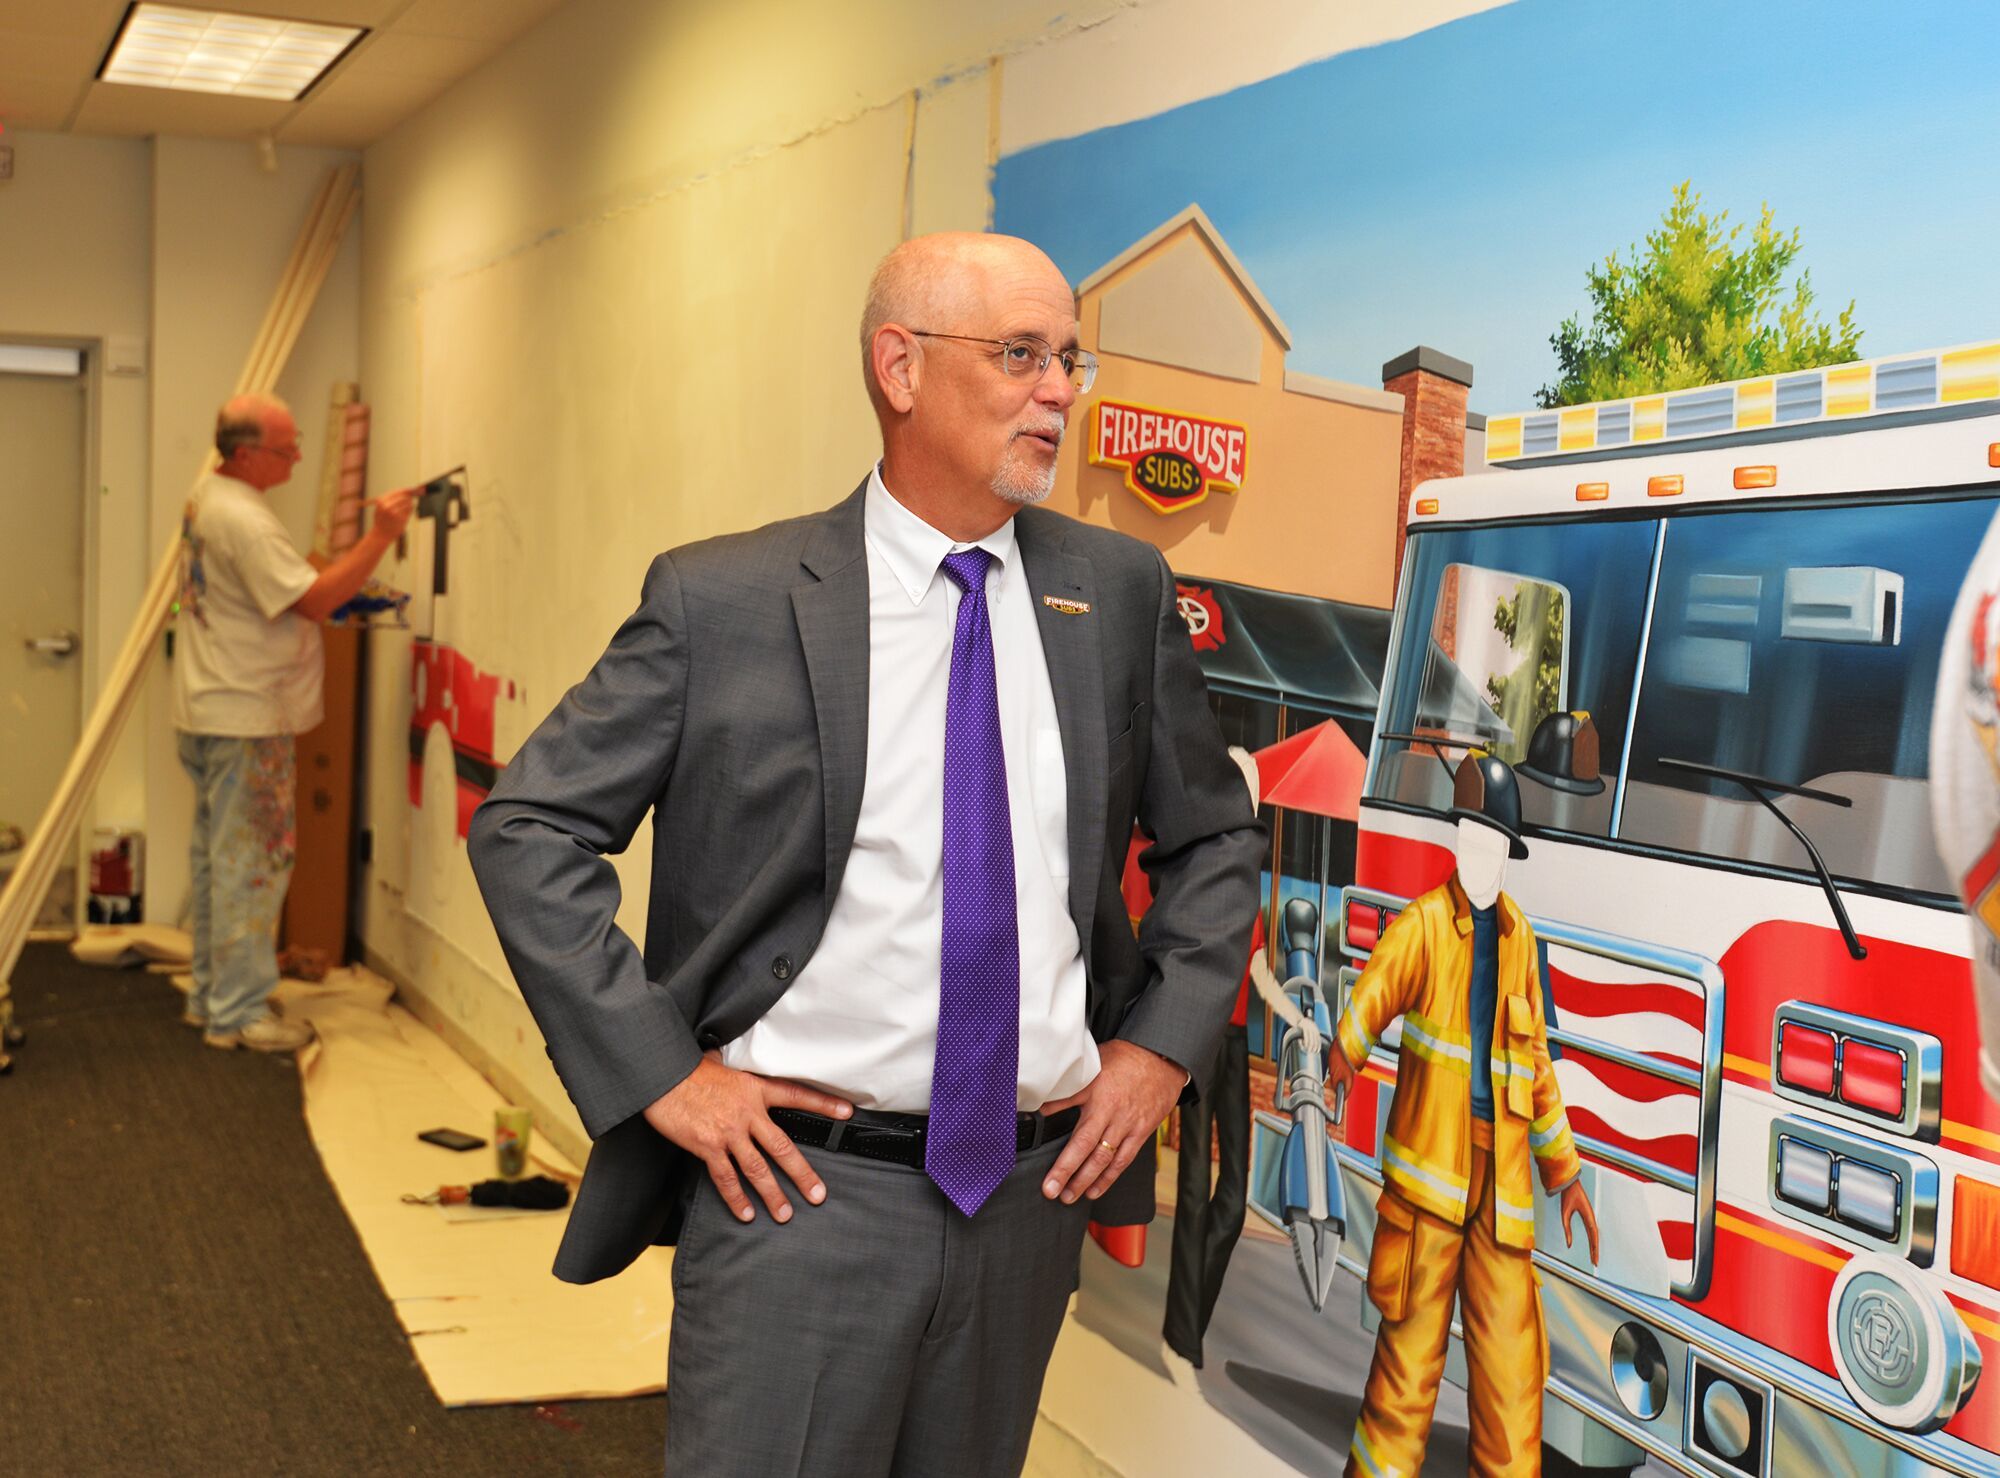 Murals of first responders in action can be found in all Firehouse Subs restaurants. The company has donated and has helped to raise millions to buy equipment for firefighters and other first responders.